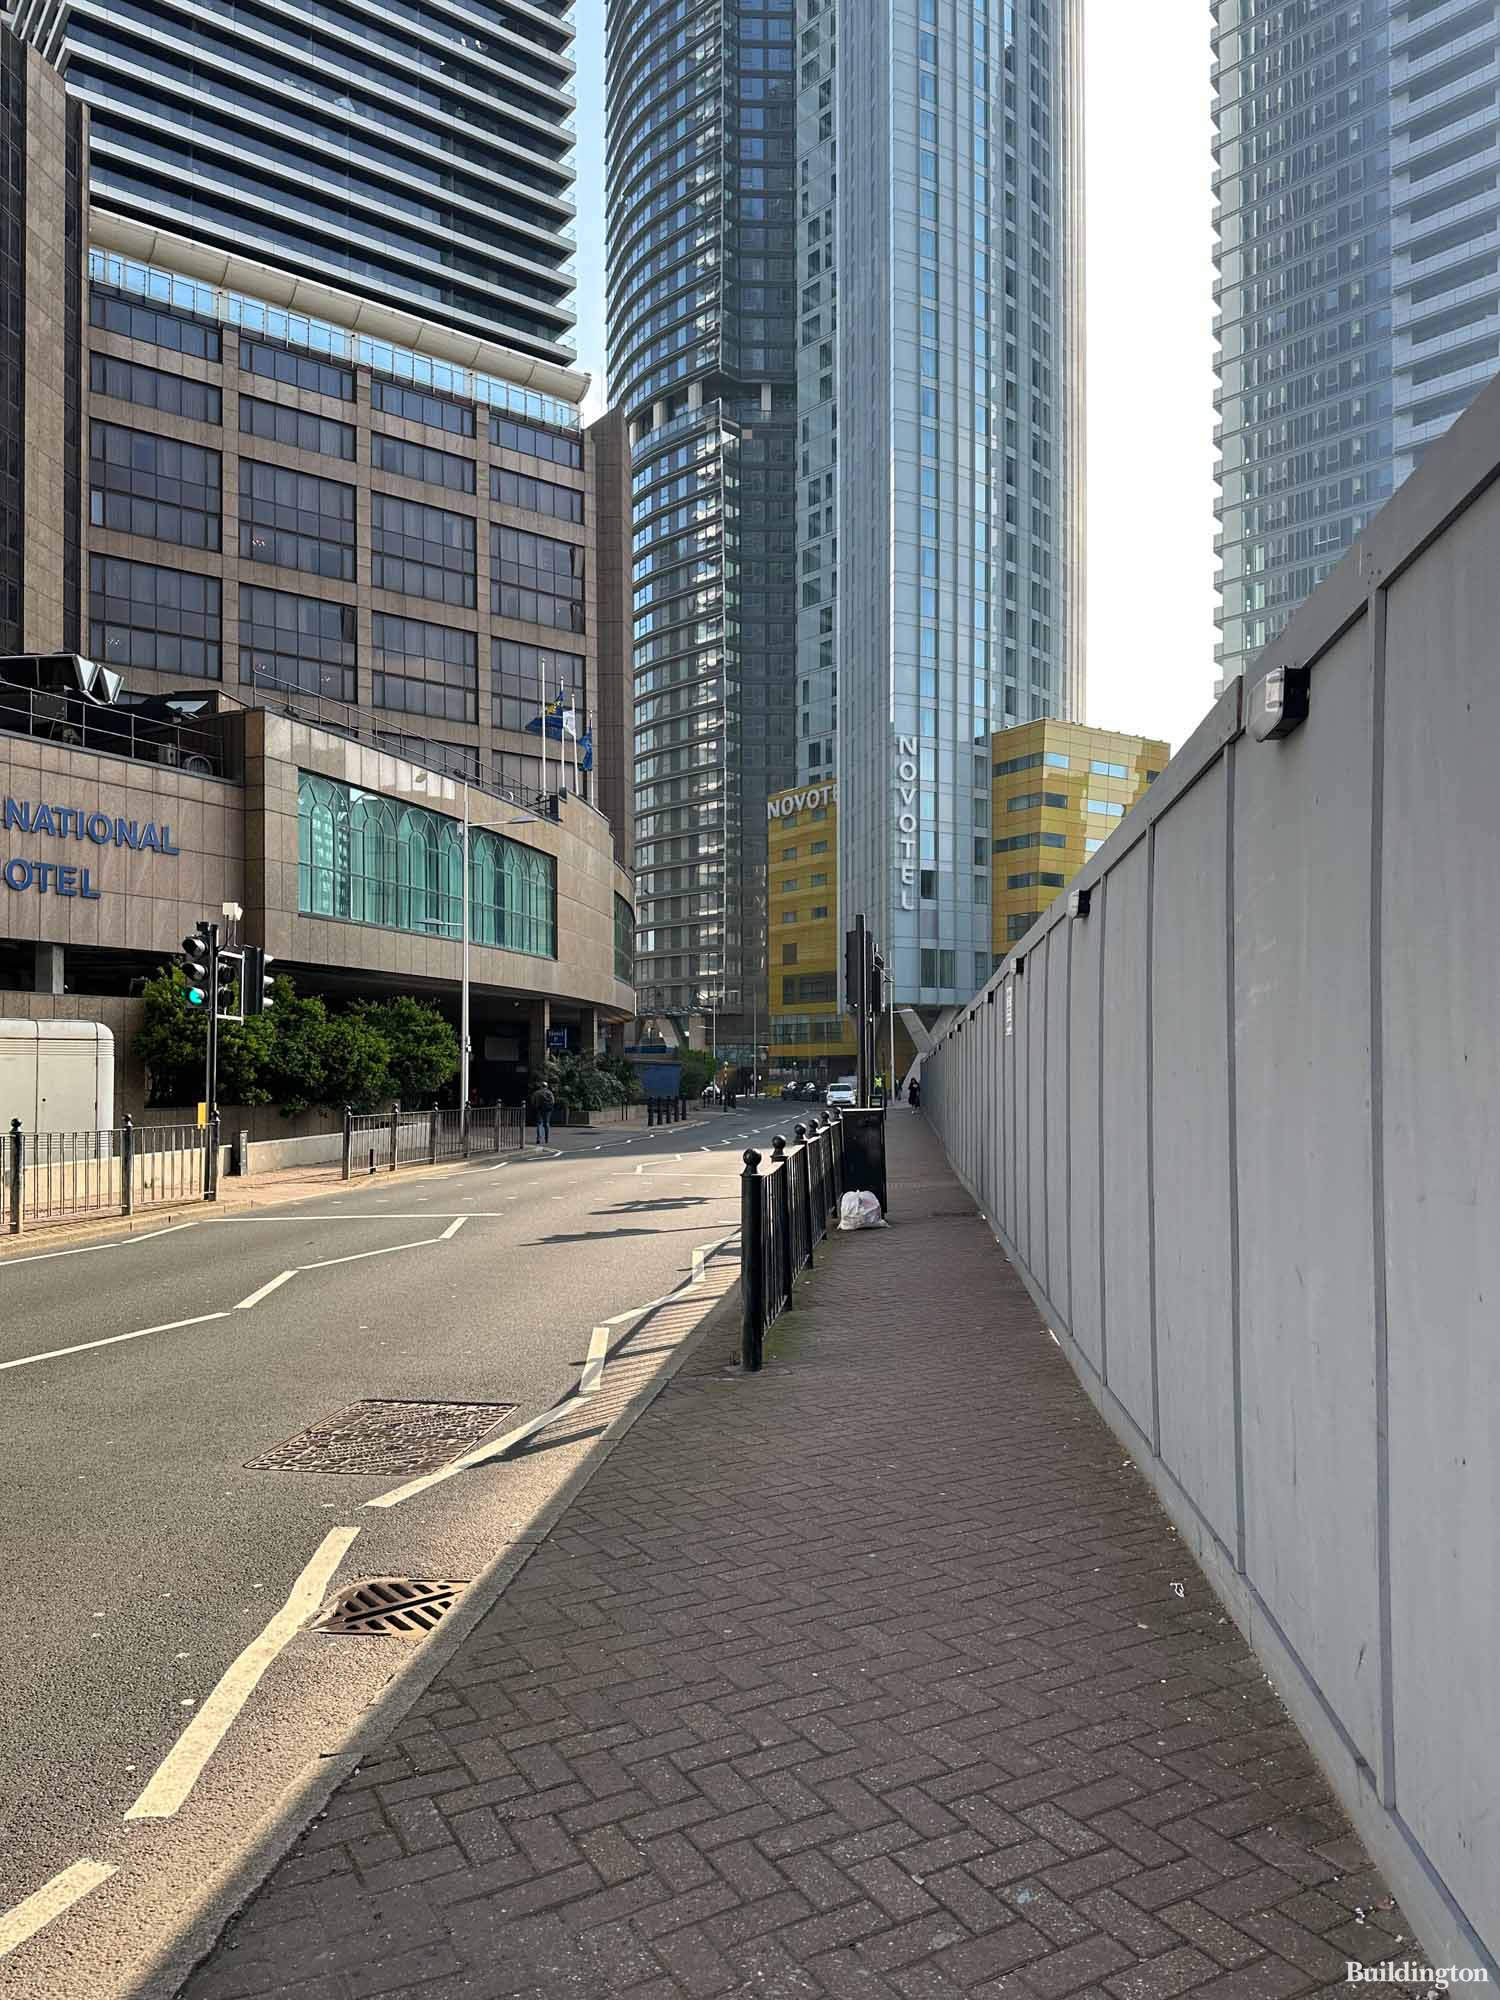 30 Marsh Wall development site on the Isle of Dogs E14